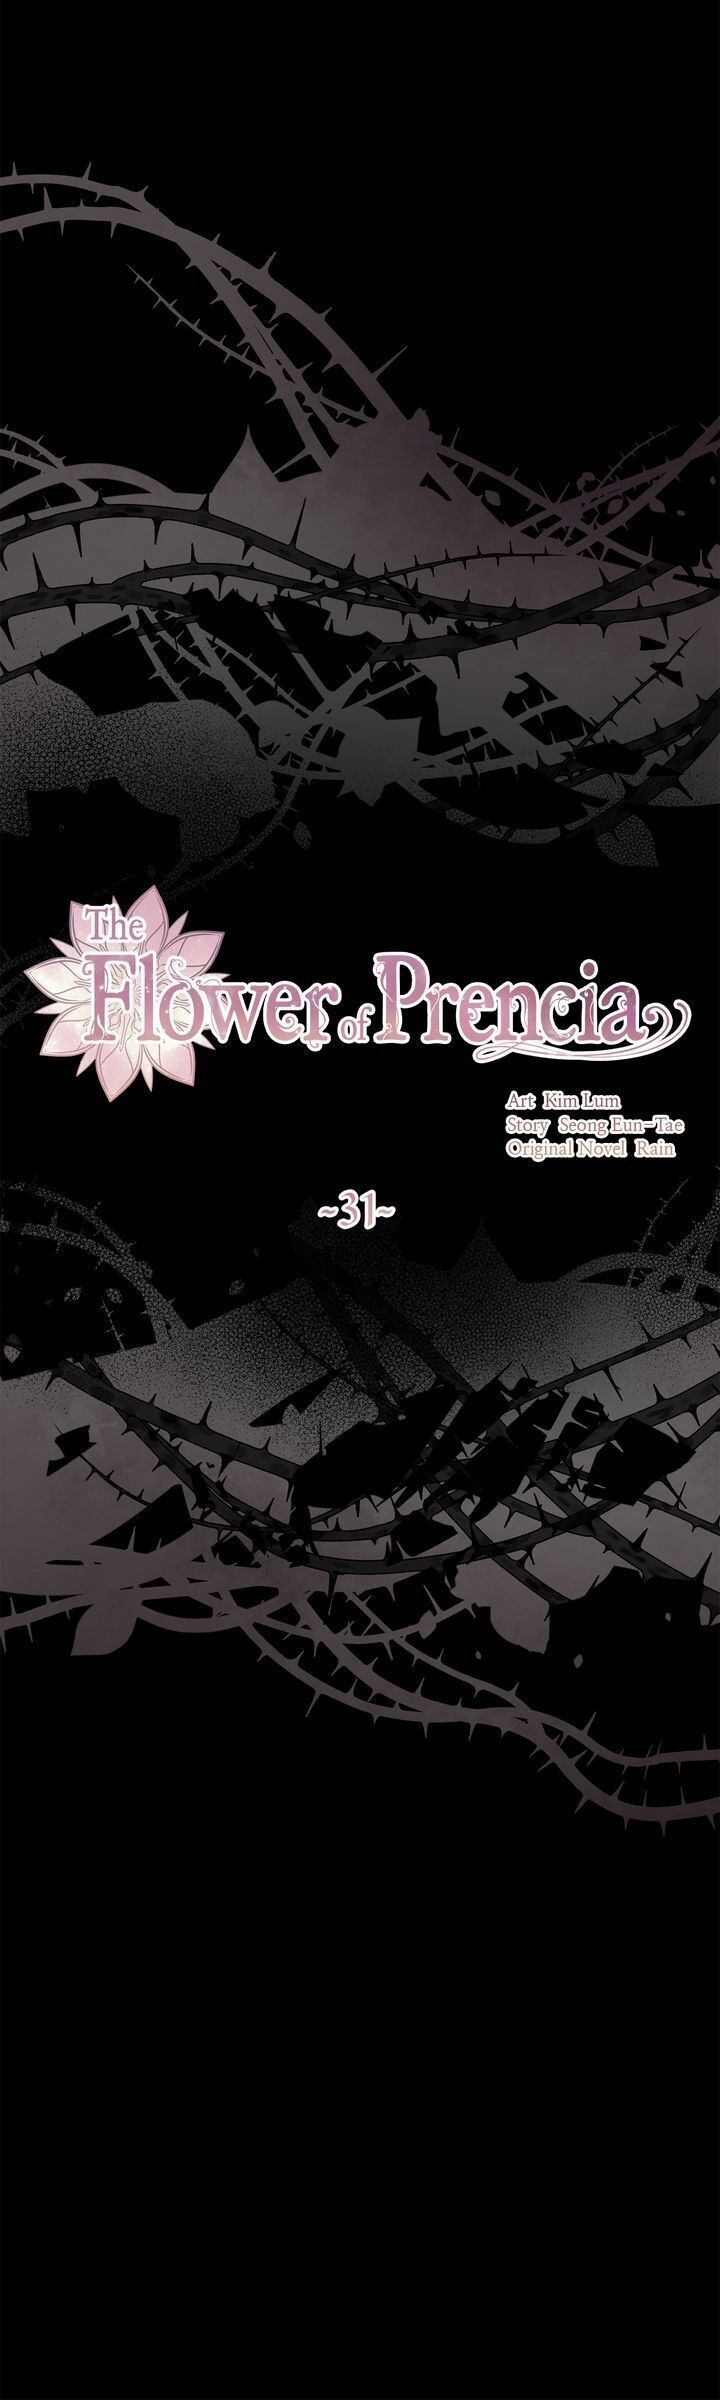 The Flower of Francia Chapter 031 page 1